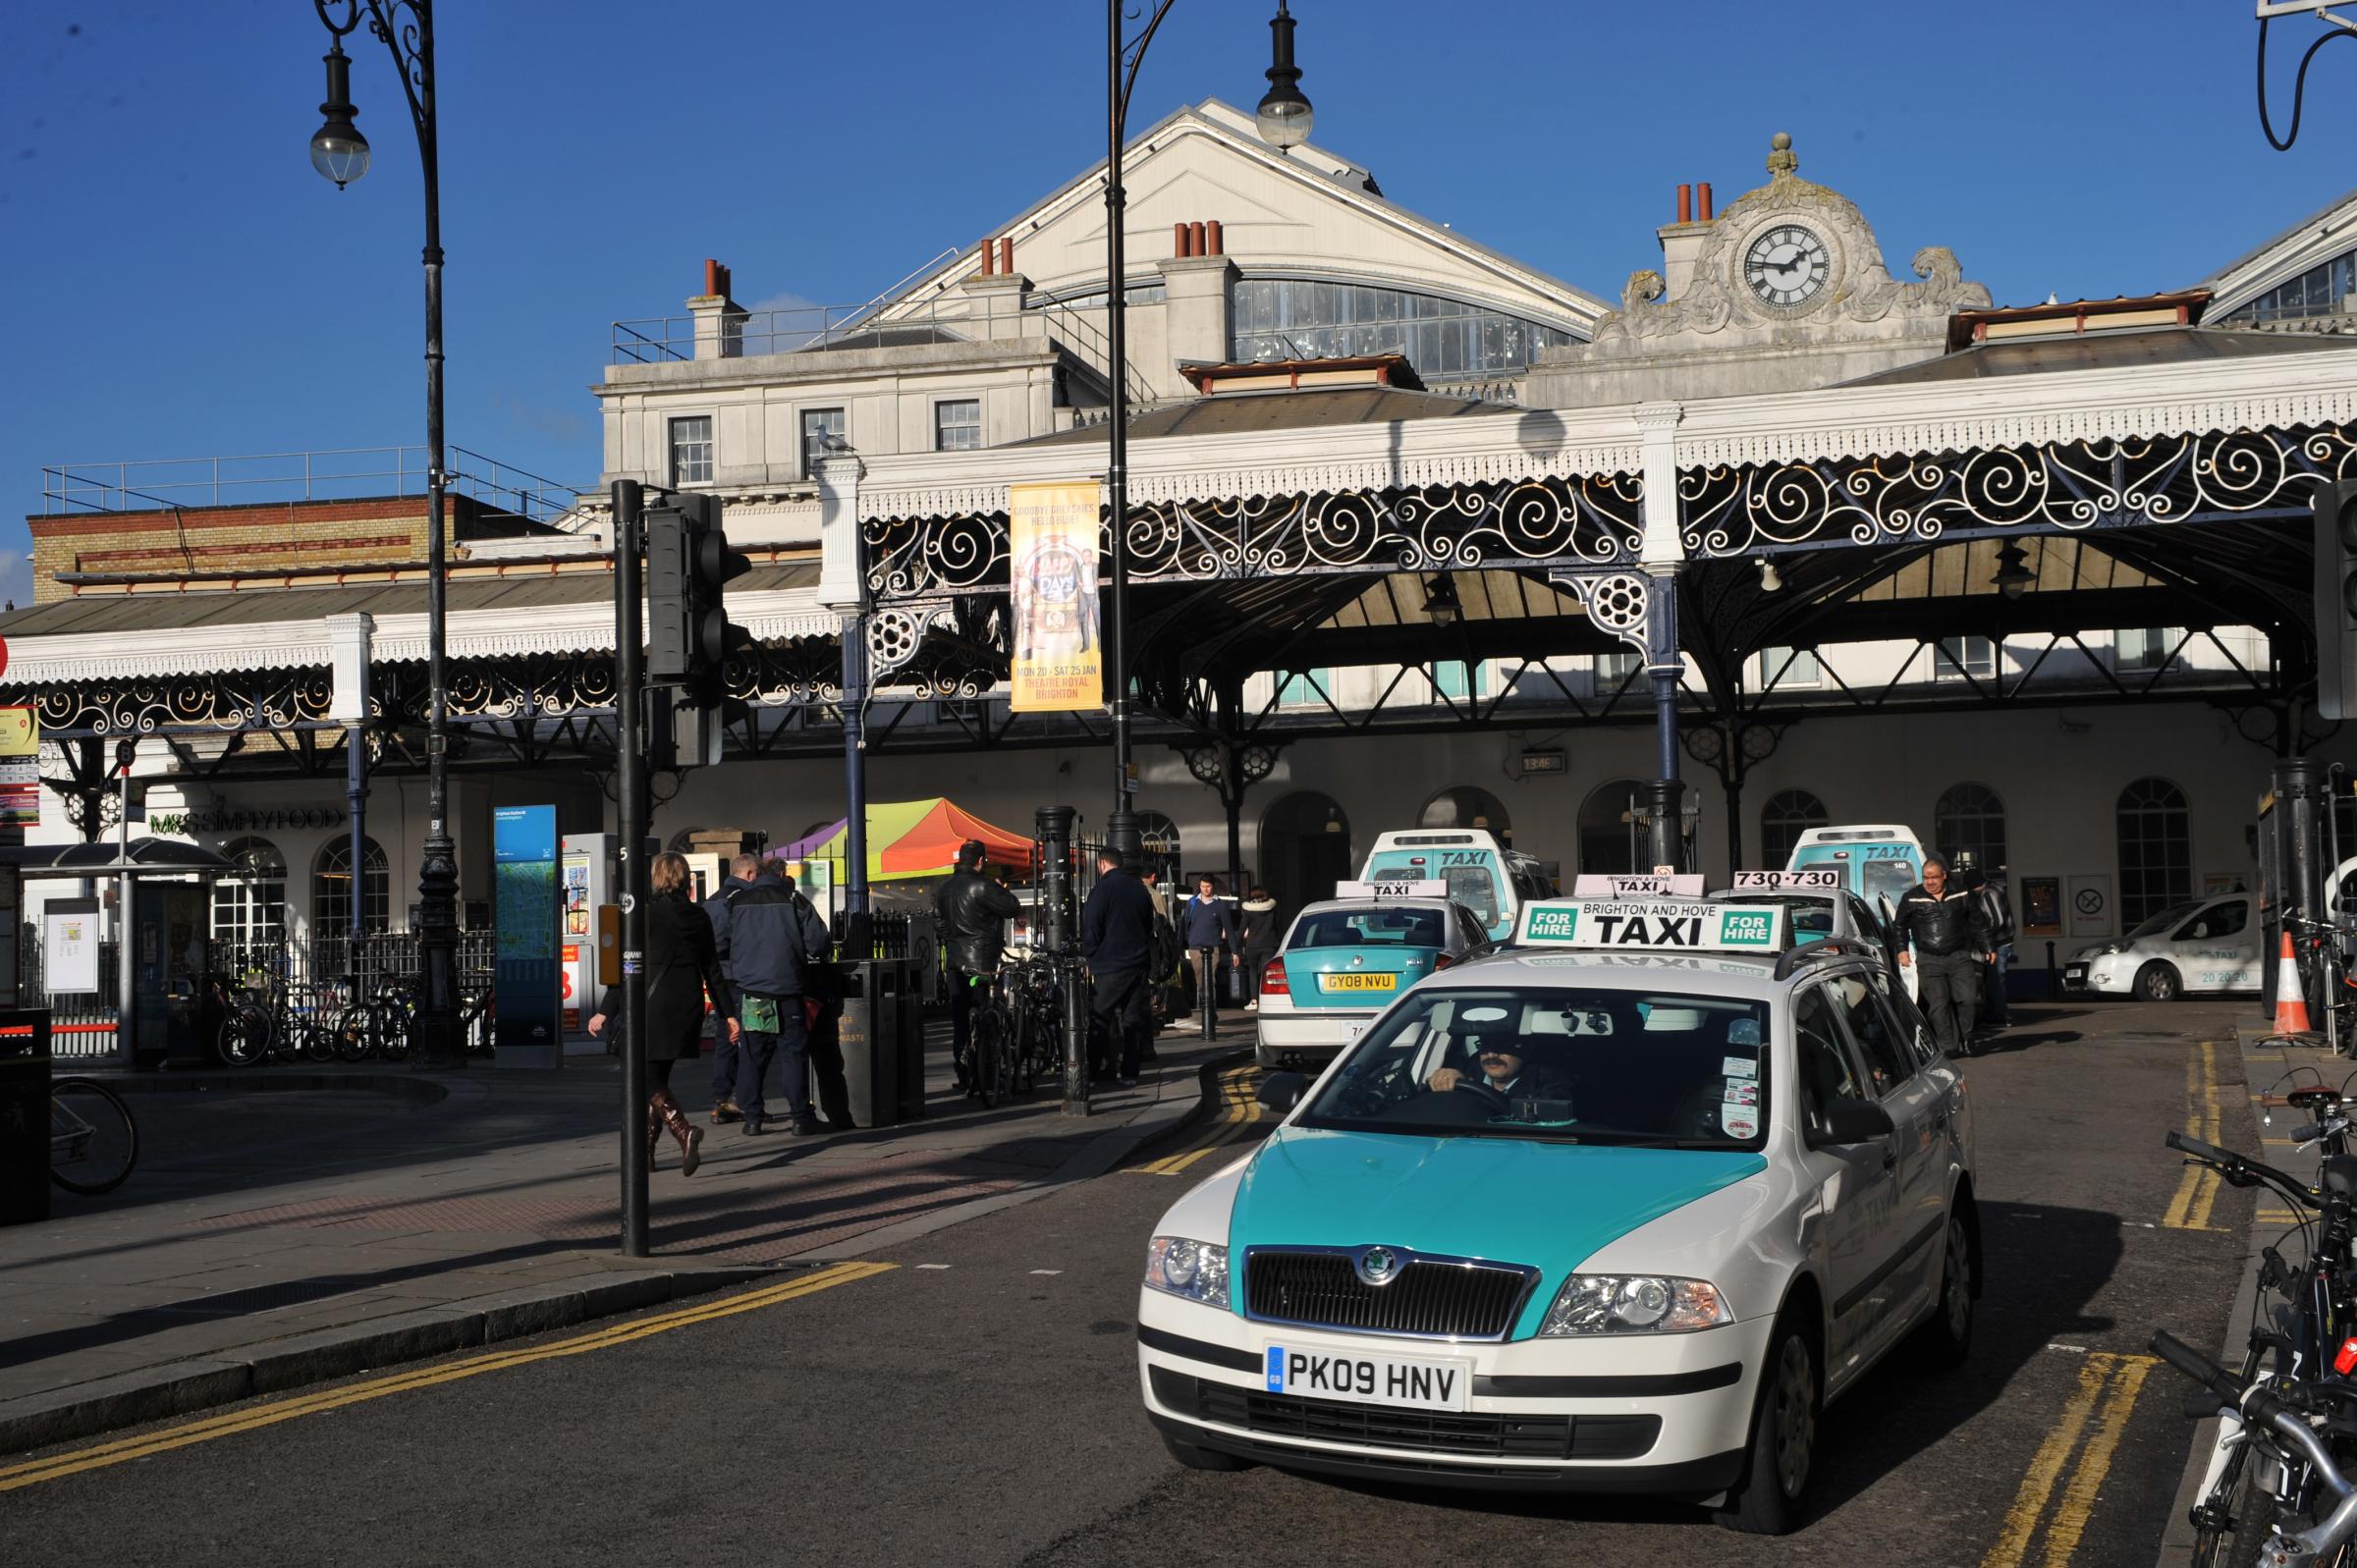 Railway station taxi rank is not working for anyone, says councillor